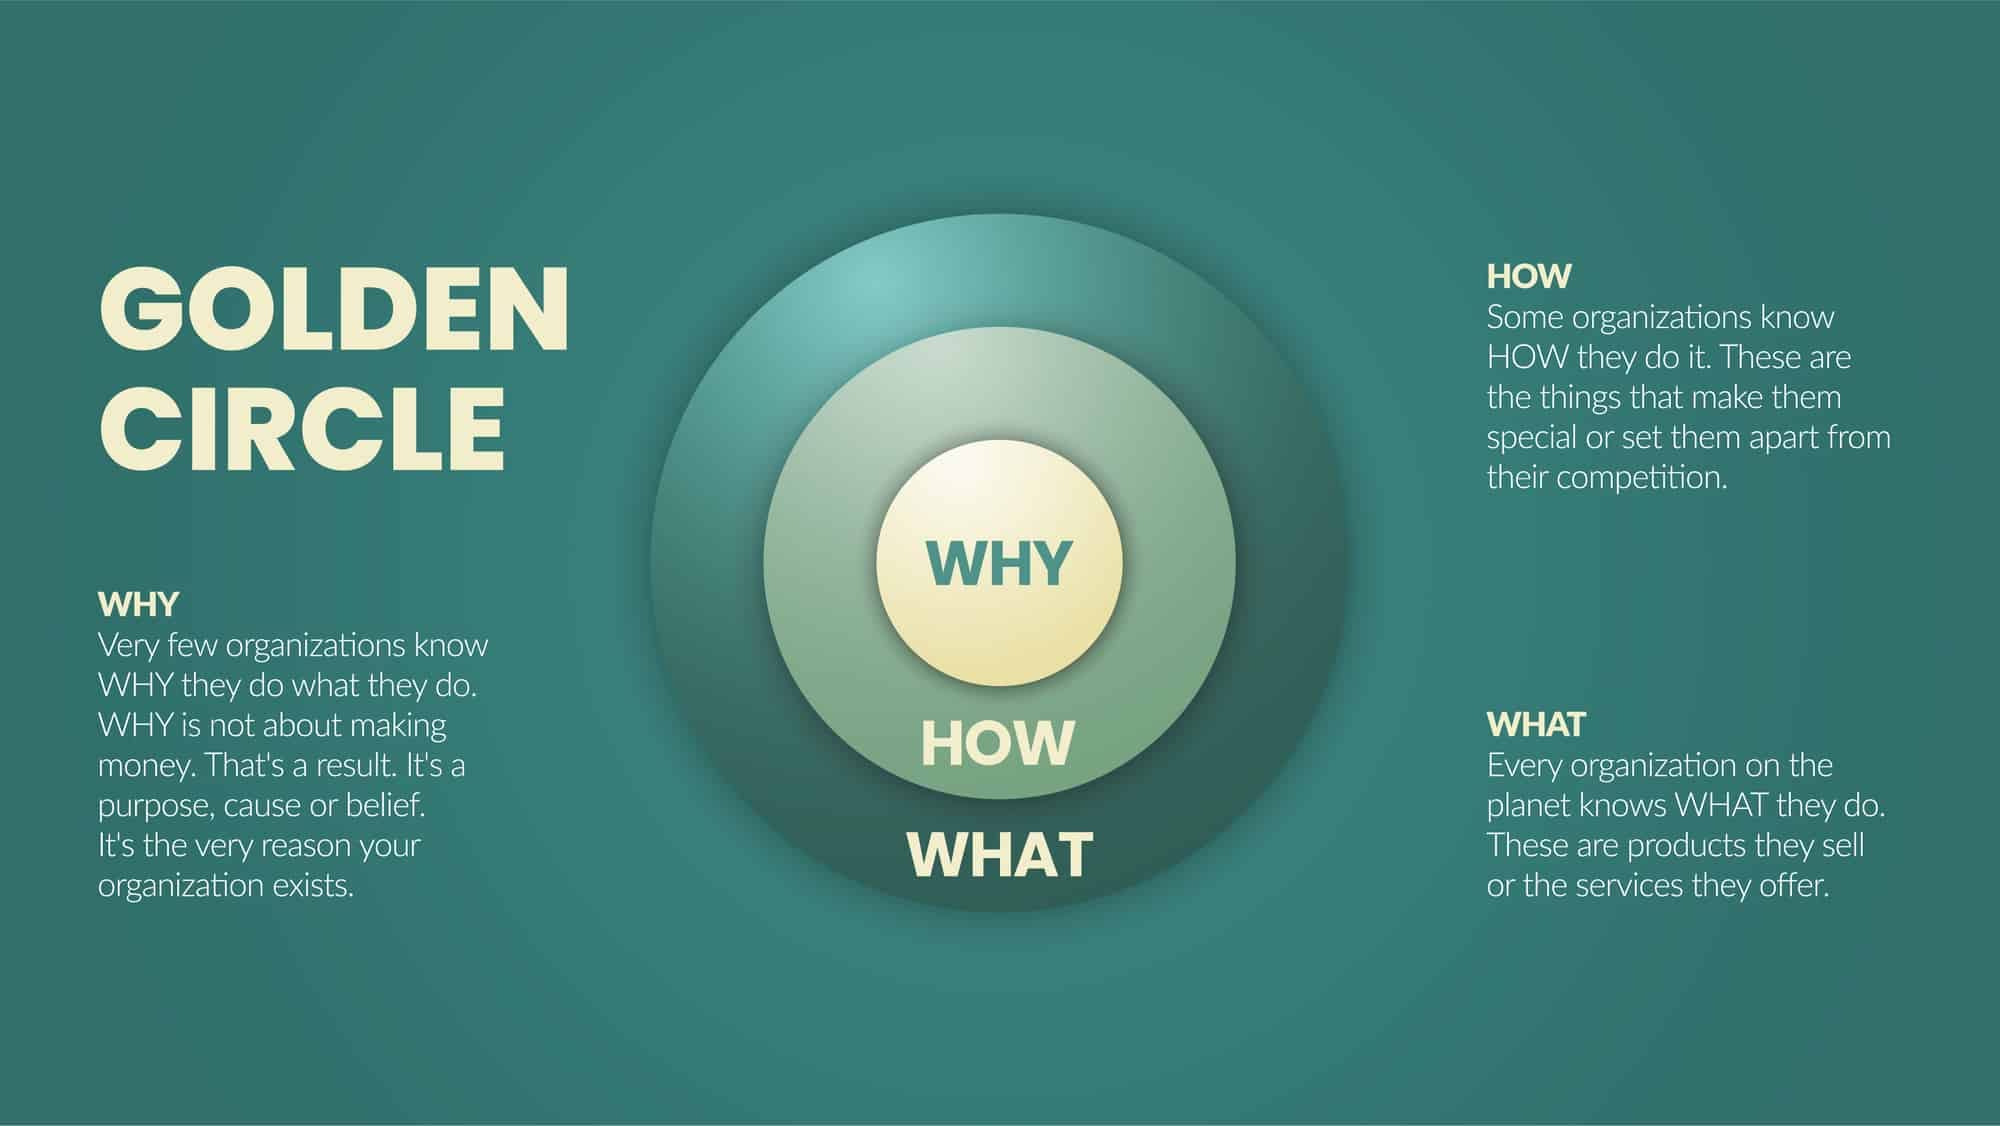 why-how-what-analysis-golden-circle-theory-how-to-conduct